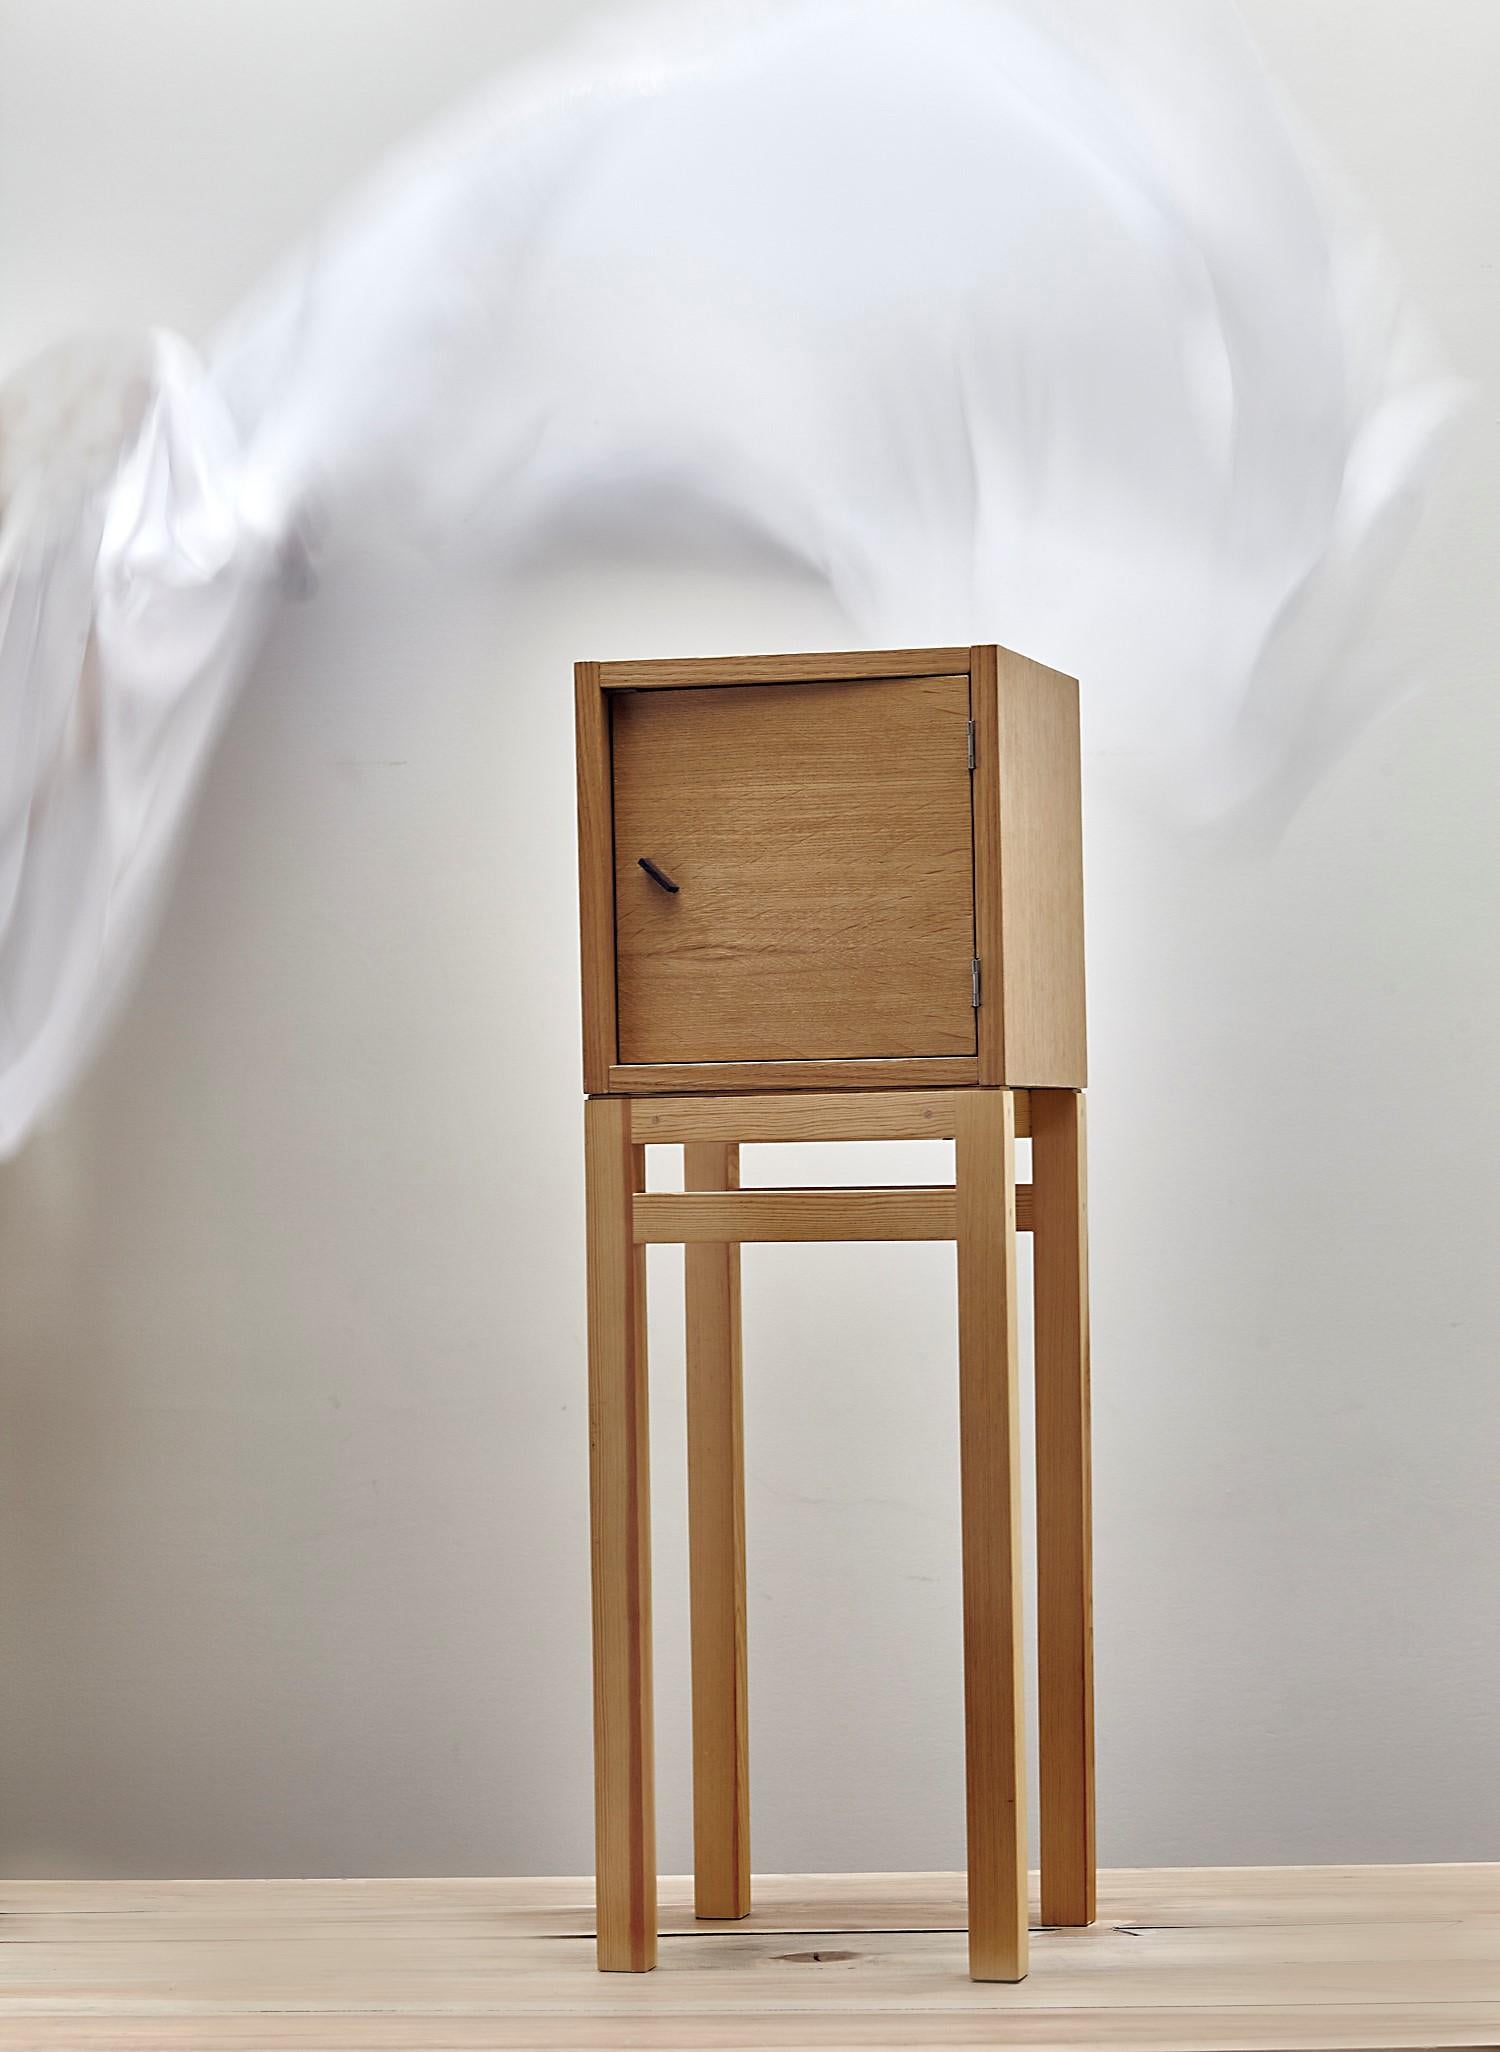 Cube cabinet by Jean-Baptiste Van den Heede
Signed and numbered
Dimensions: L 30 x W 30 x H 90 cm
Materials: Natural oakwood, nordic pine base

Cube cabinet, auxiliary furniture for bedside table, house entrance, bar cabinet or jewel